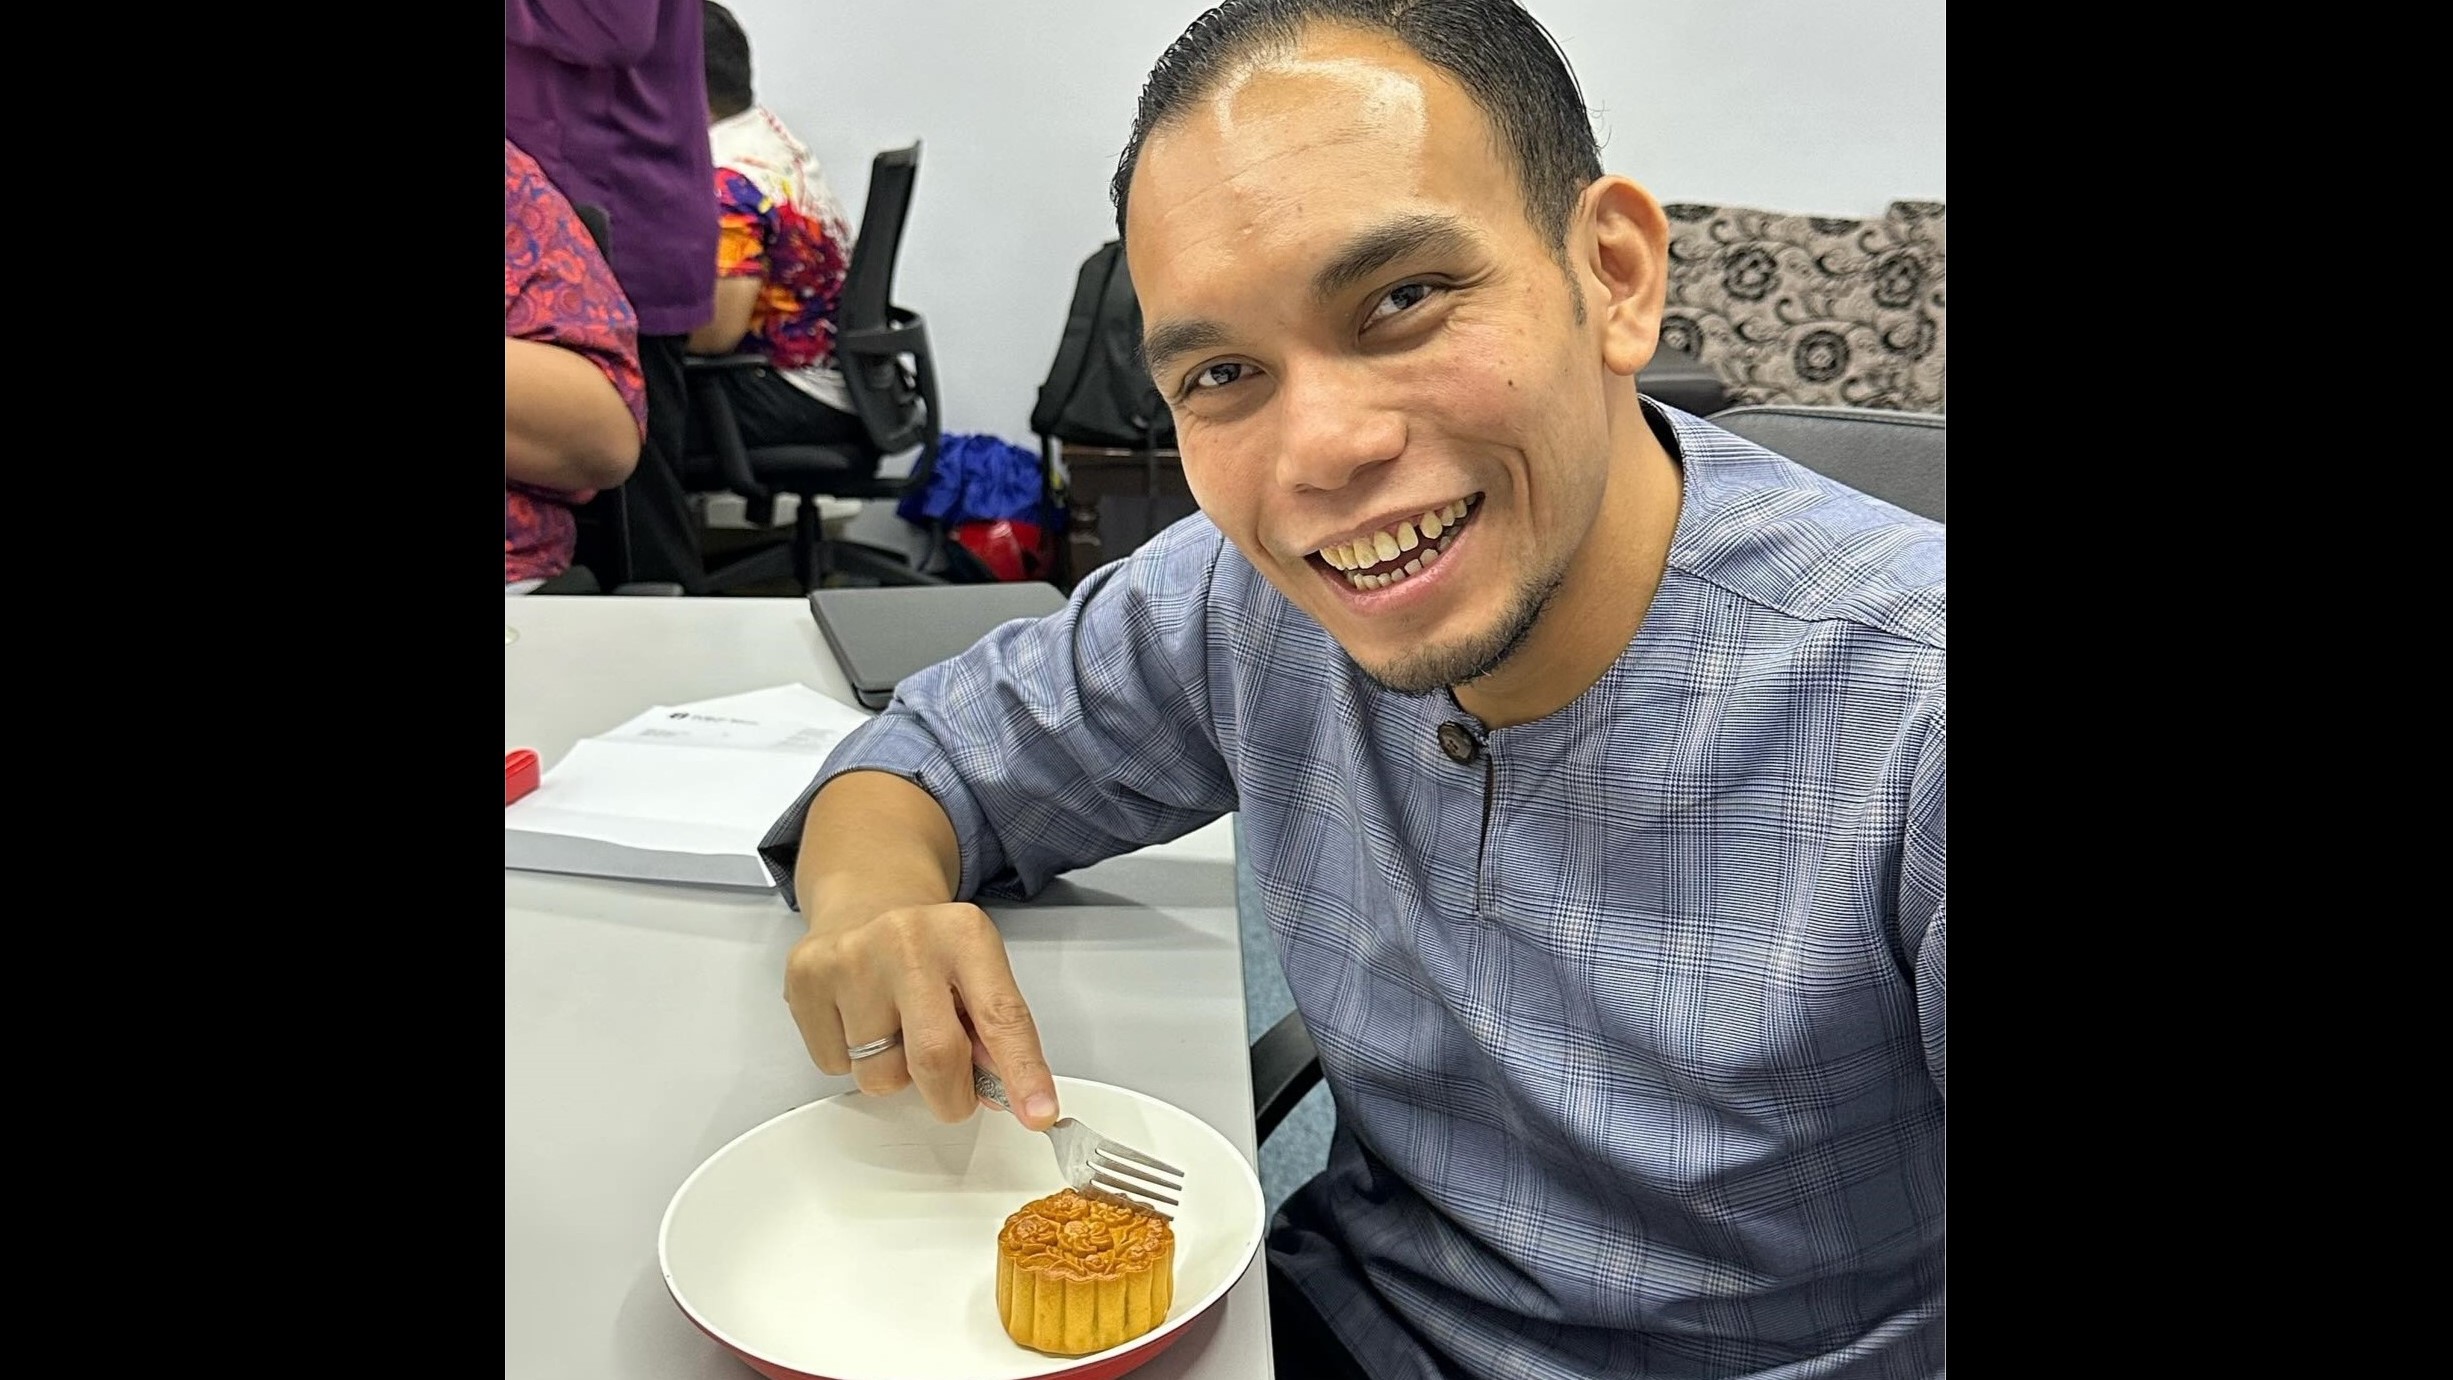 Syahredzan hits back at distasteful comments over mooncake 